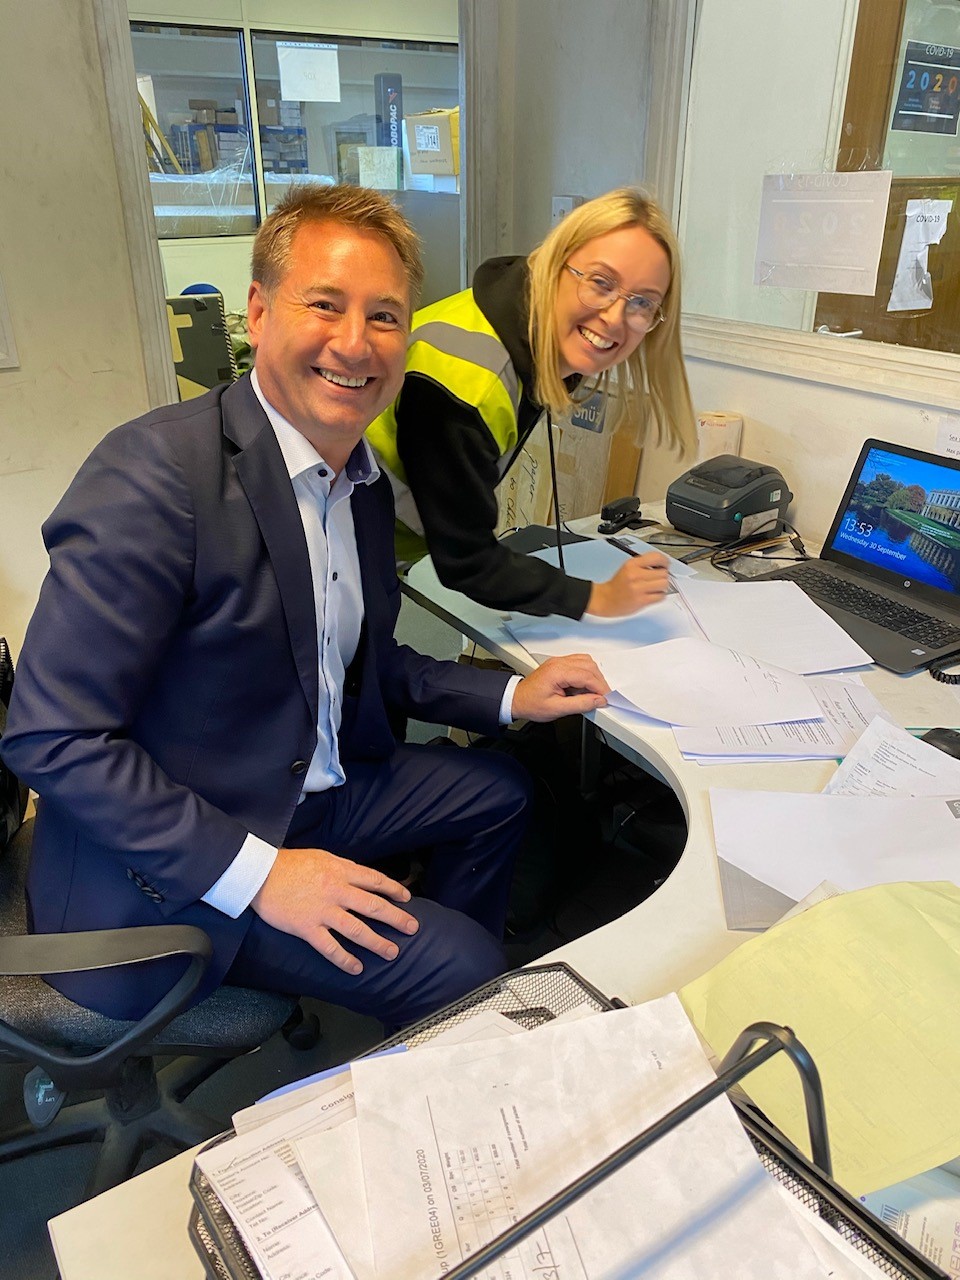 Roger Allen, CEO at Green Sheep Group, and Rosie Pritchard, Operations Director at Green Sheep Group, completing the KAE application form.